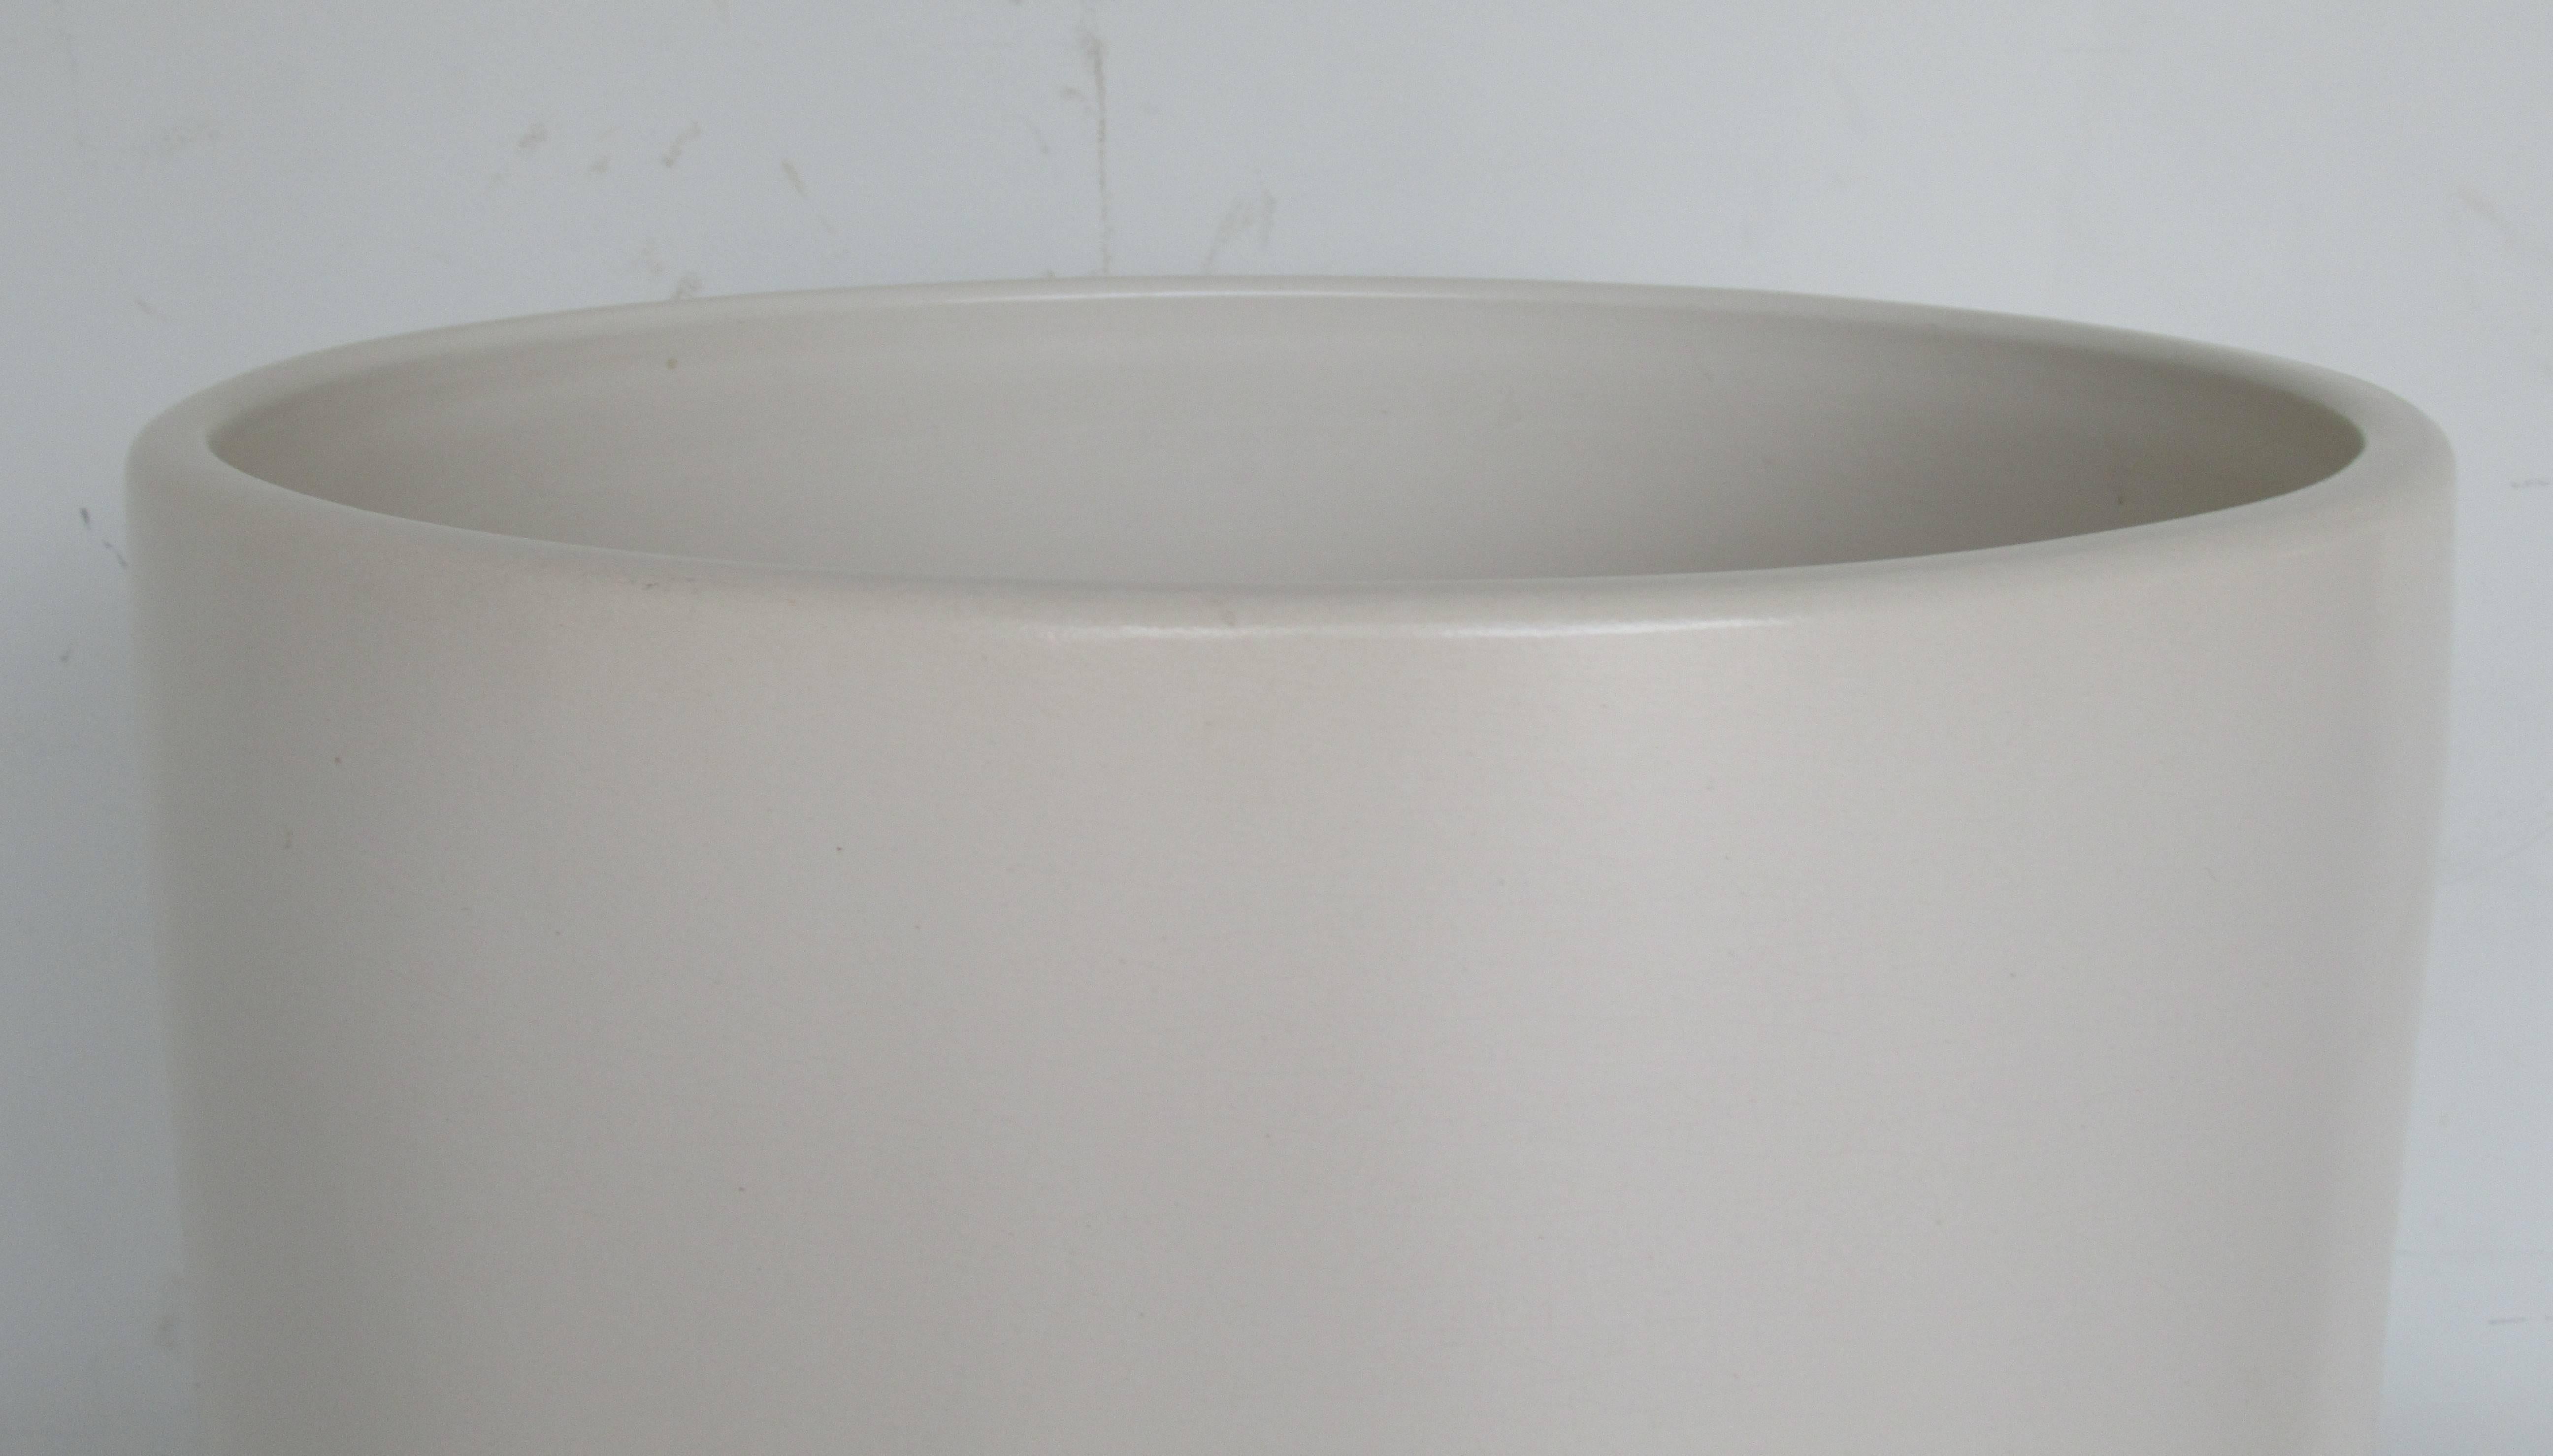 Very large and heavy cylindrical floor planter in white satin glaze. Minimalist design with no lip, no overhang and no drainage holes. Signed on inside bottom Architectural Pottery - Made in U.S.A and signed on outside bottom U.S.A., circa 1960, Los